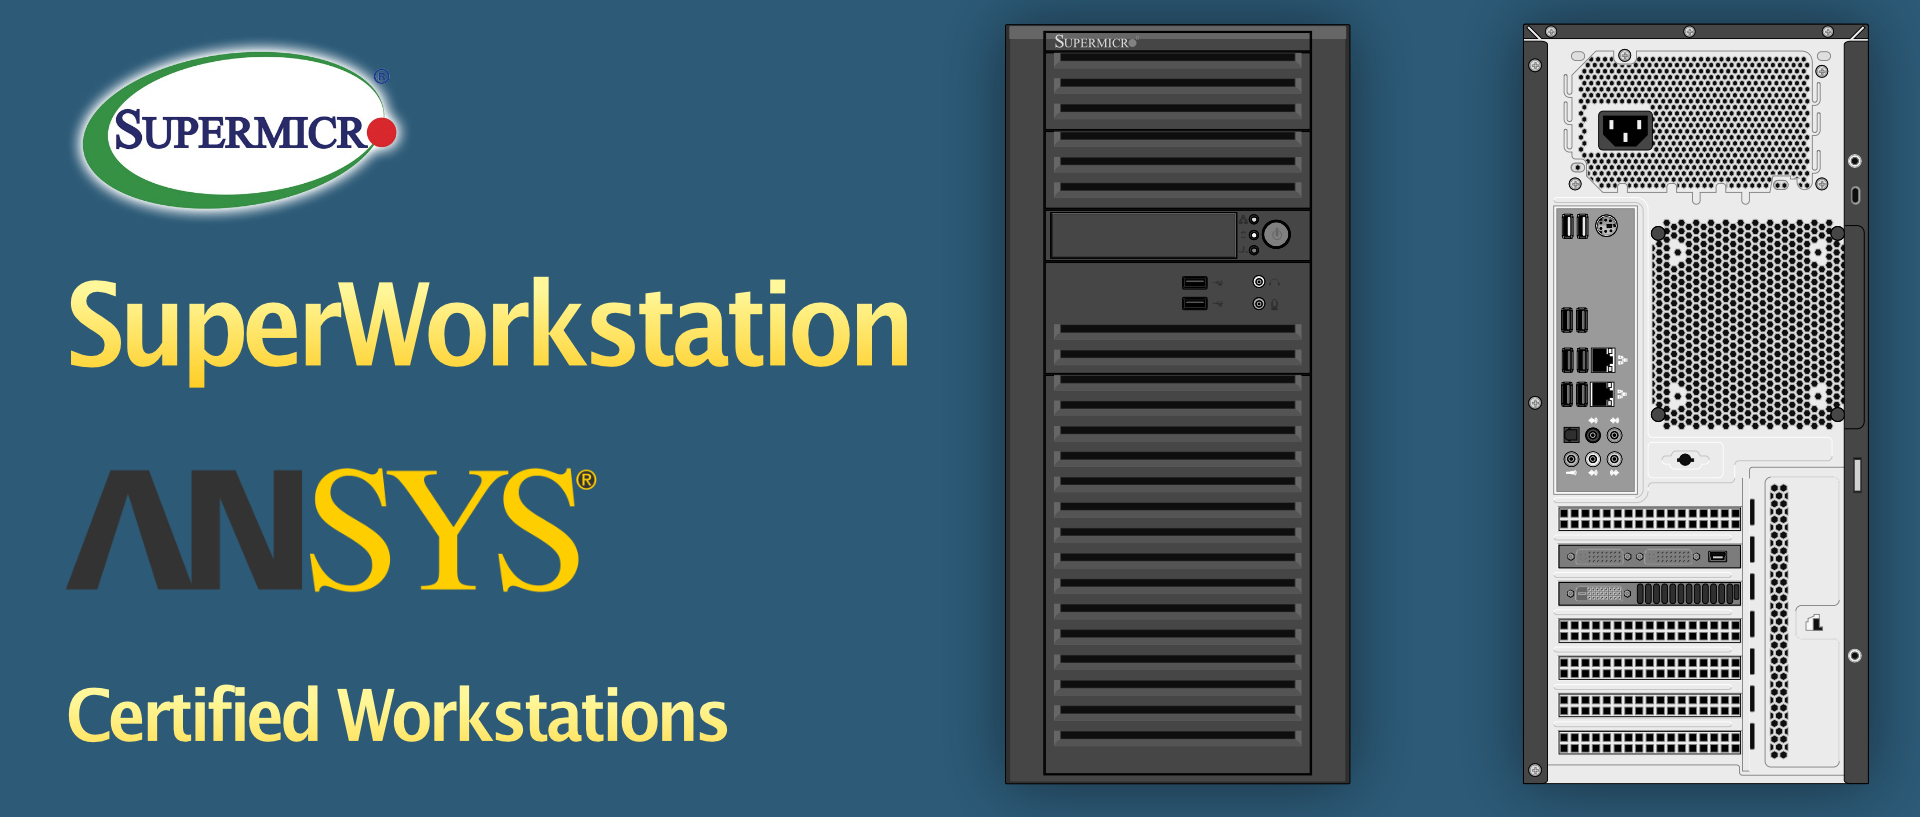 ANSYS workstations